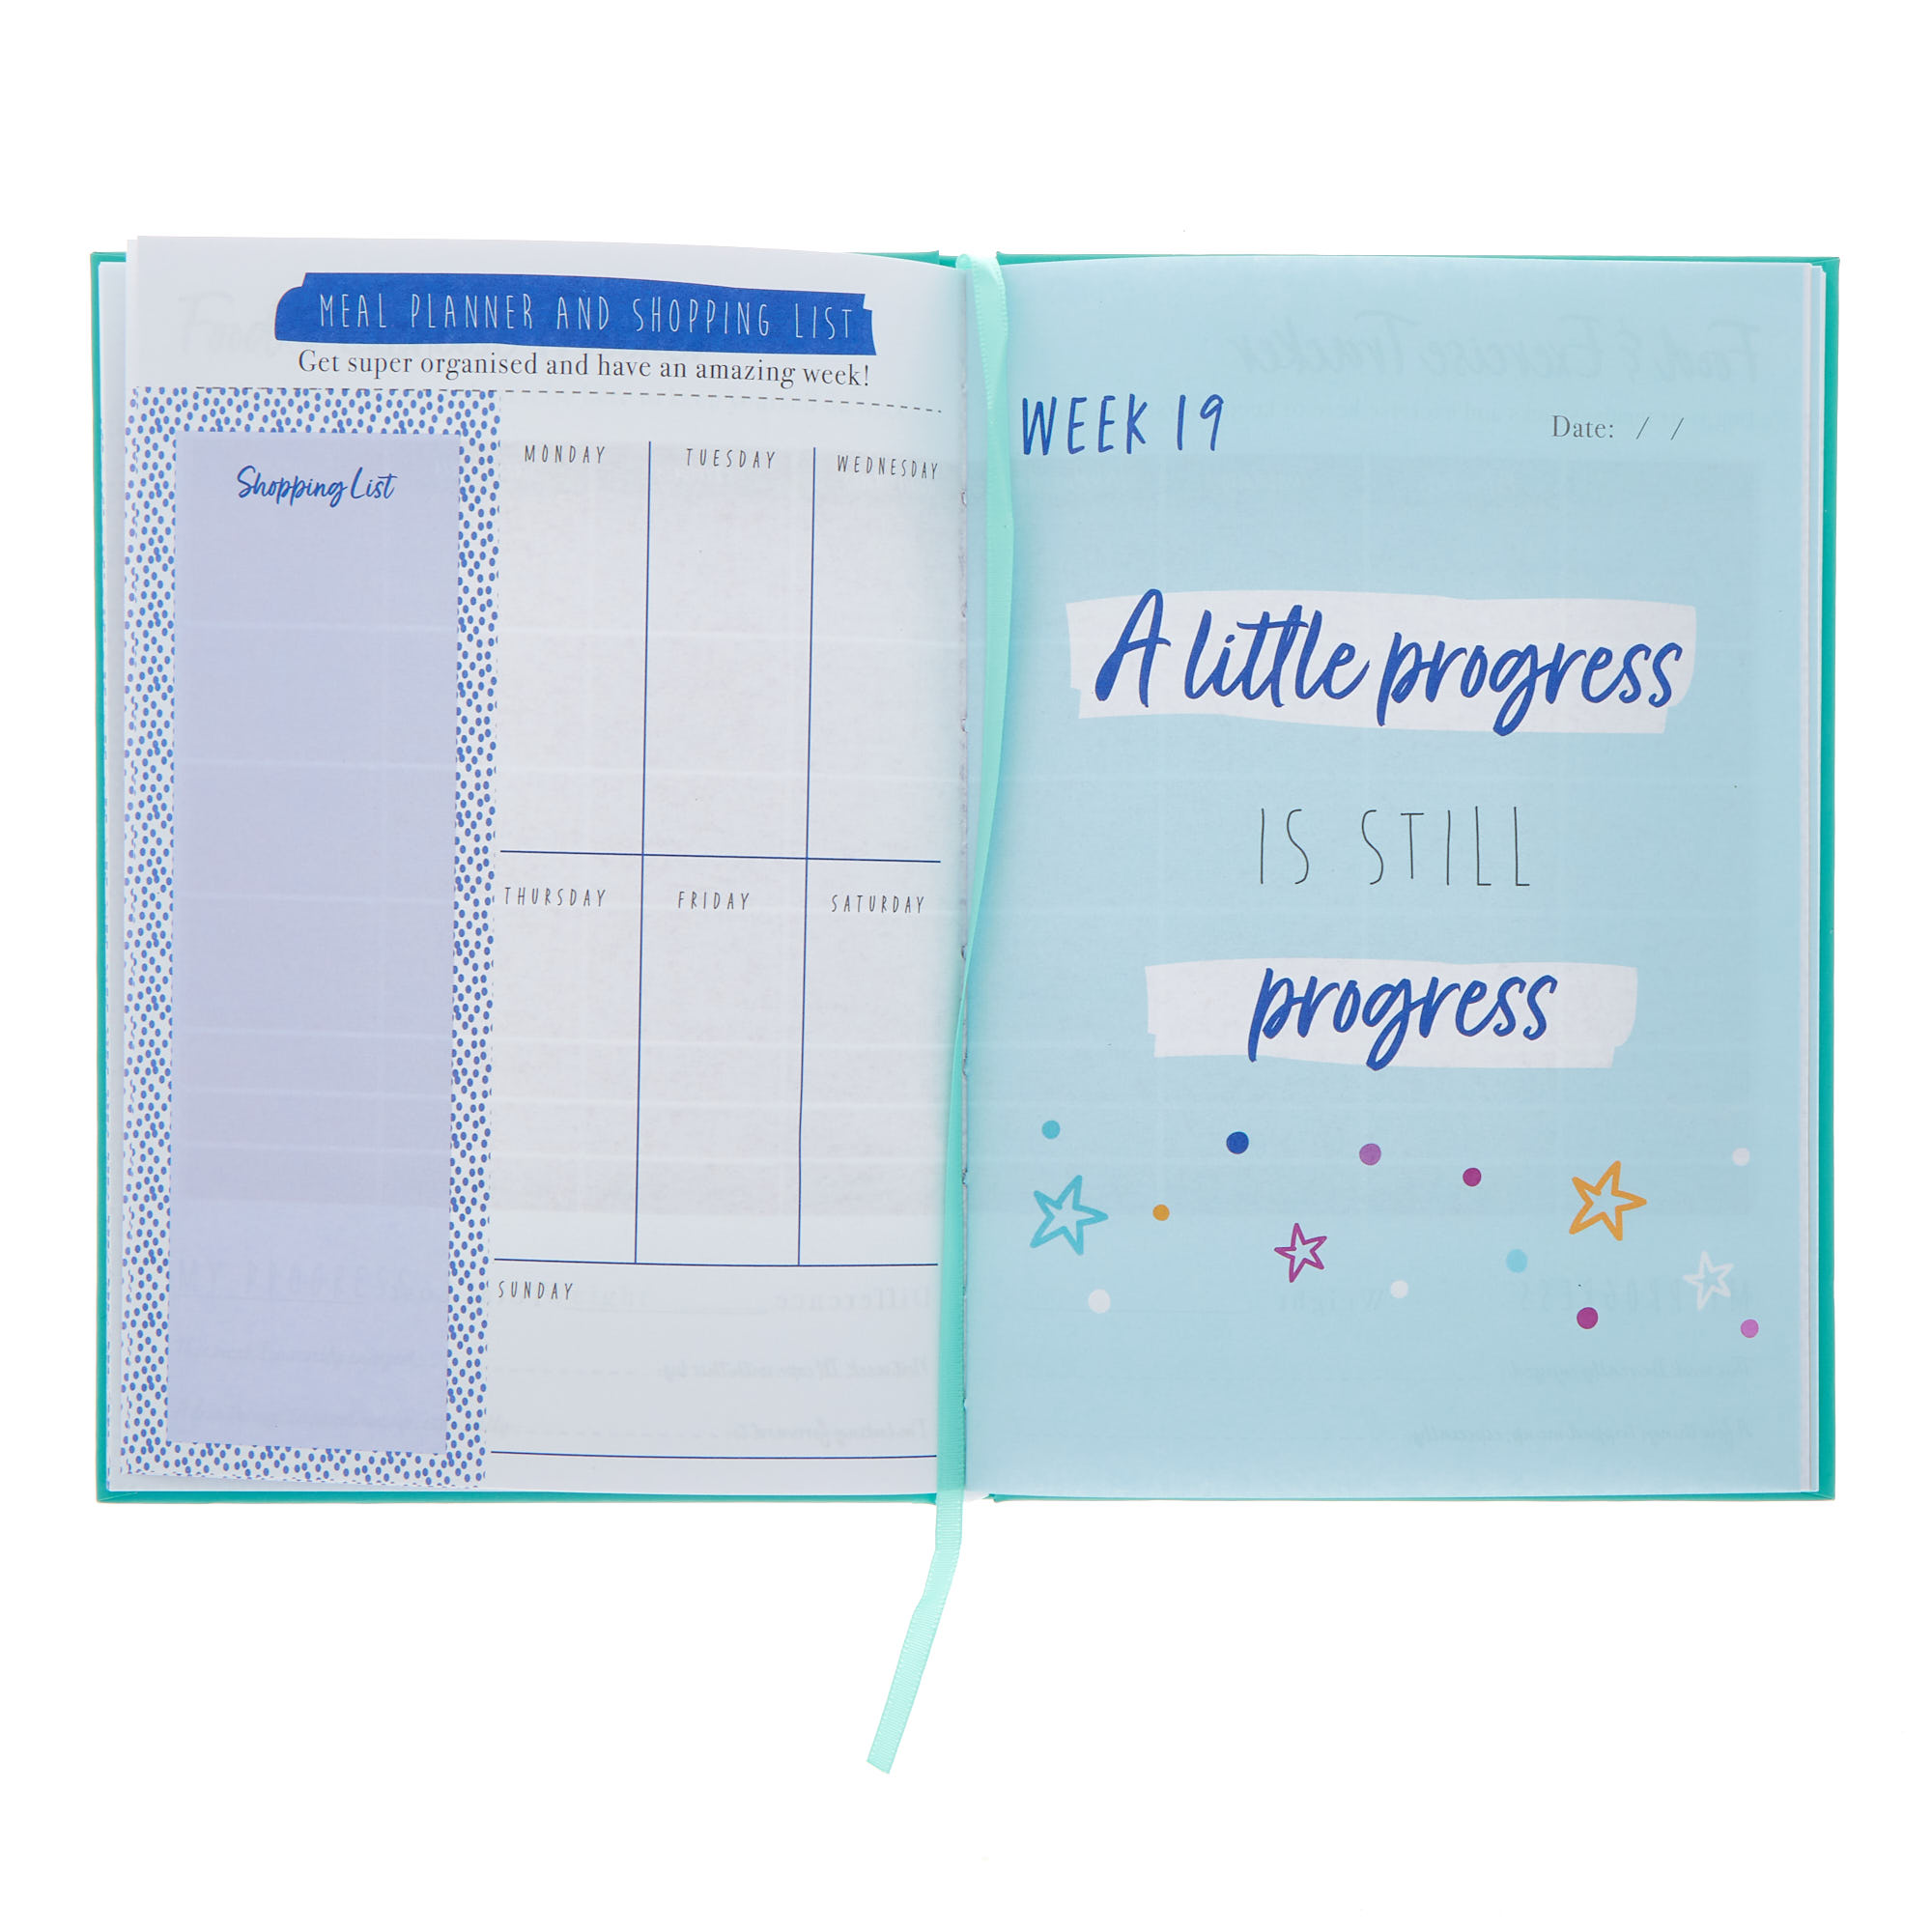 My Weight Loss Journey Journal